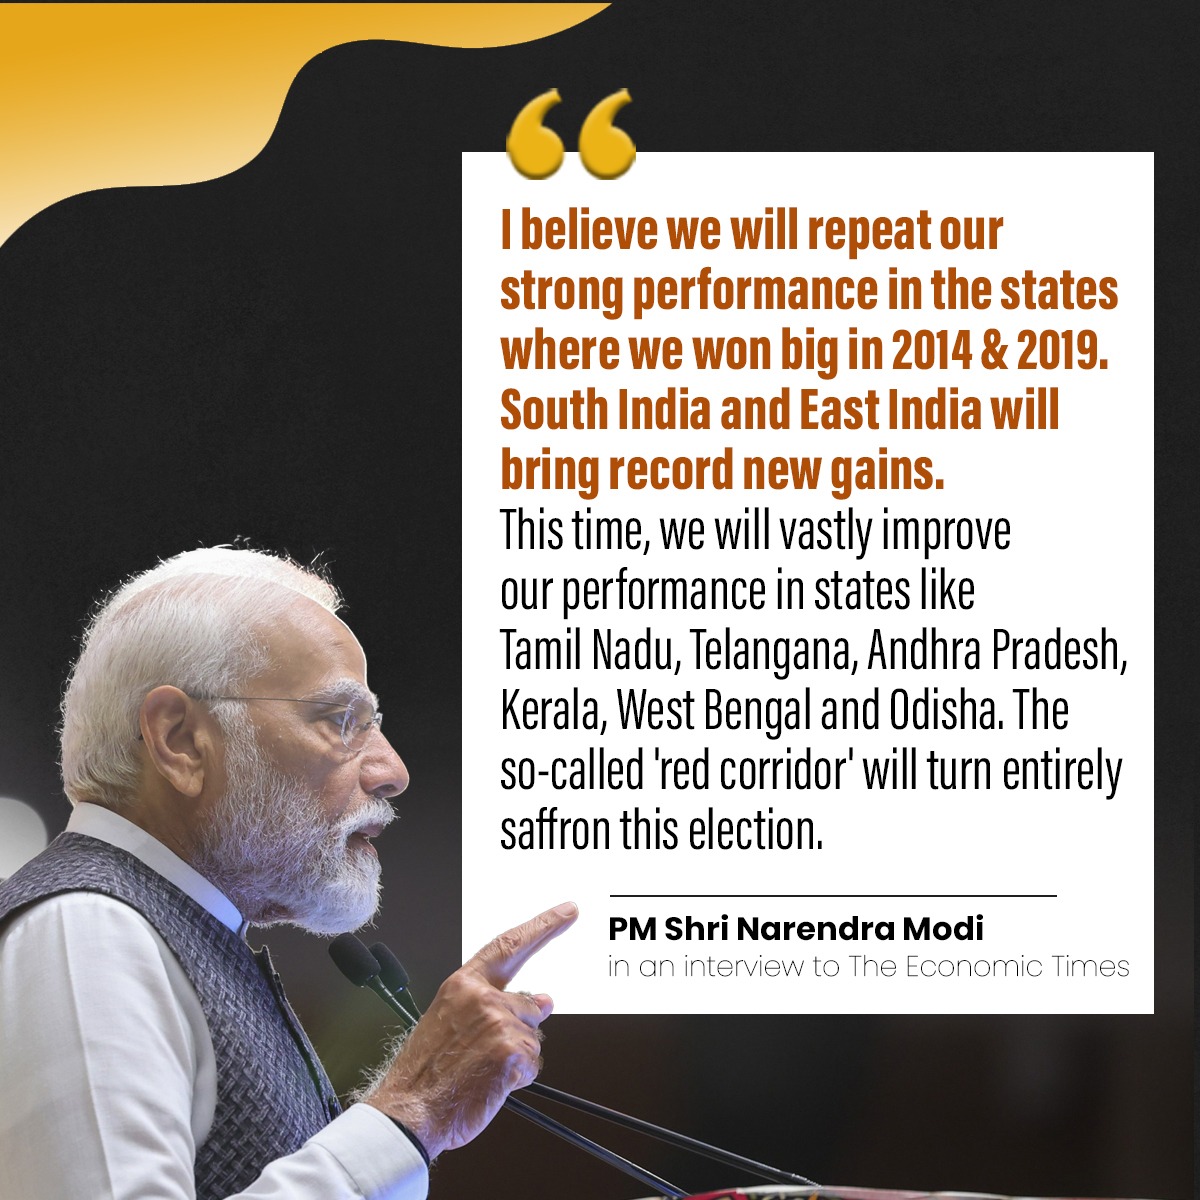 I believe we will repeat our strong performance in the states where we won big in 2014 and 2019. South India and East India will bring record new gains. - PM Shri @narendramodi